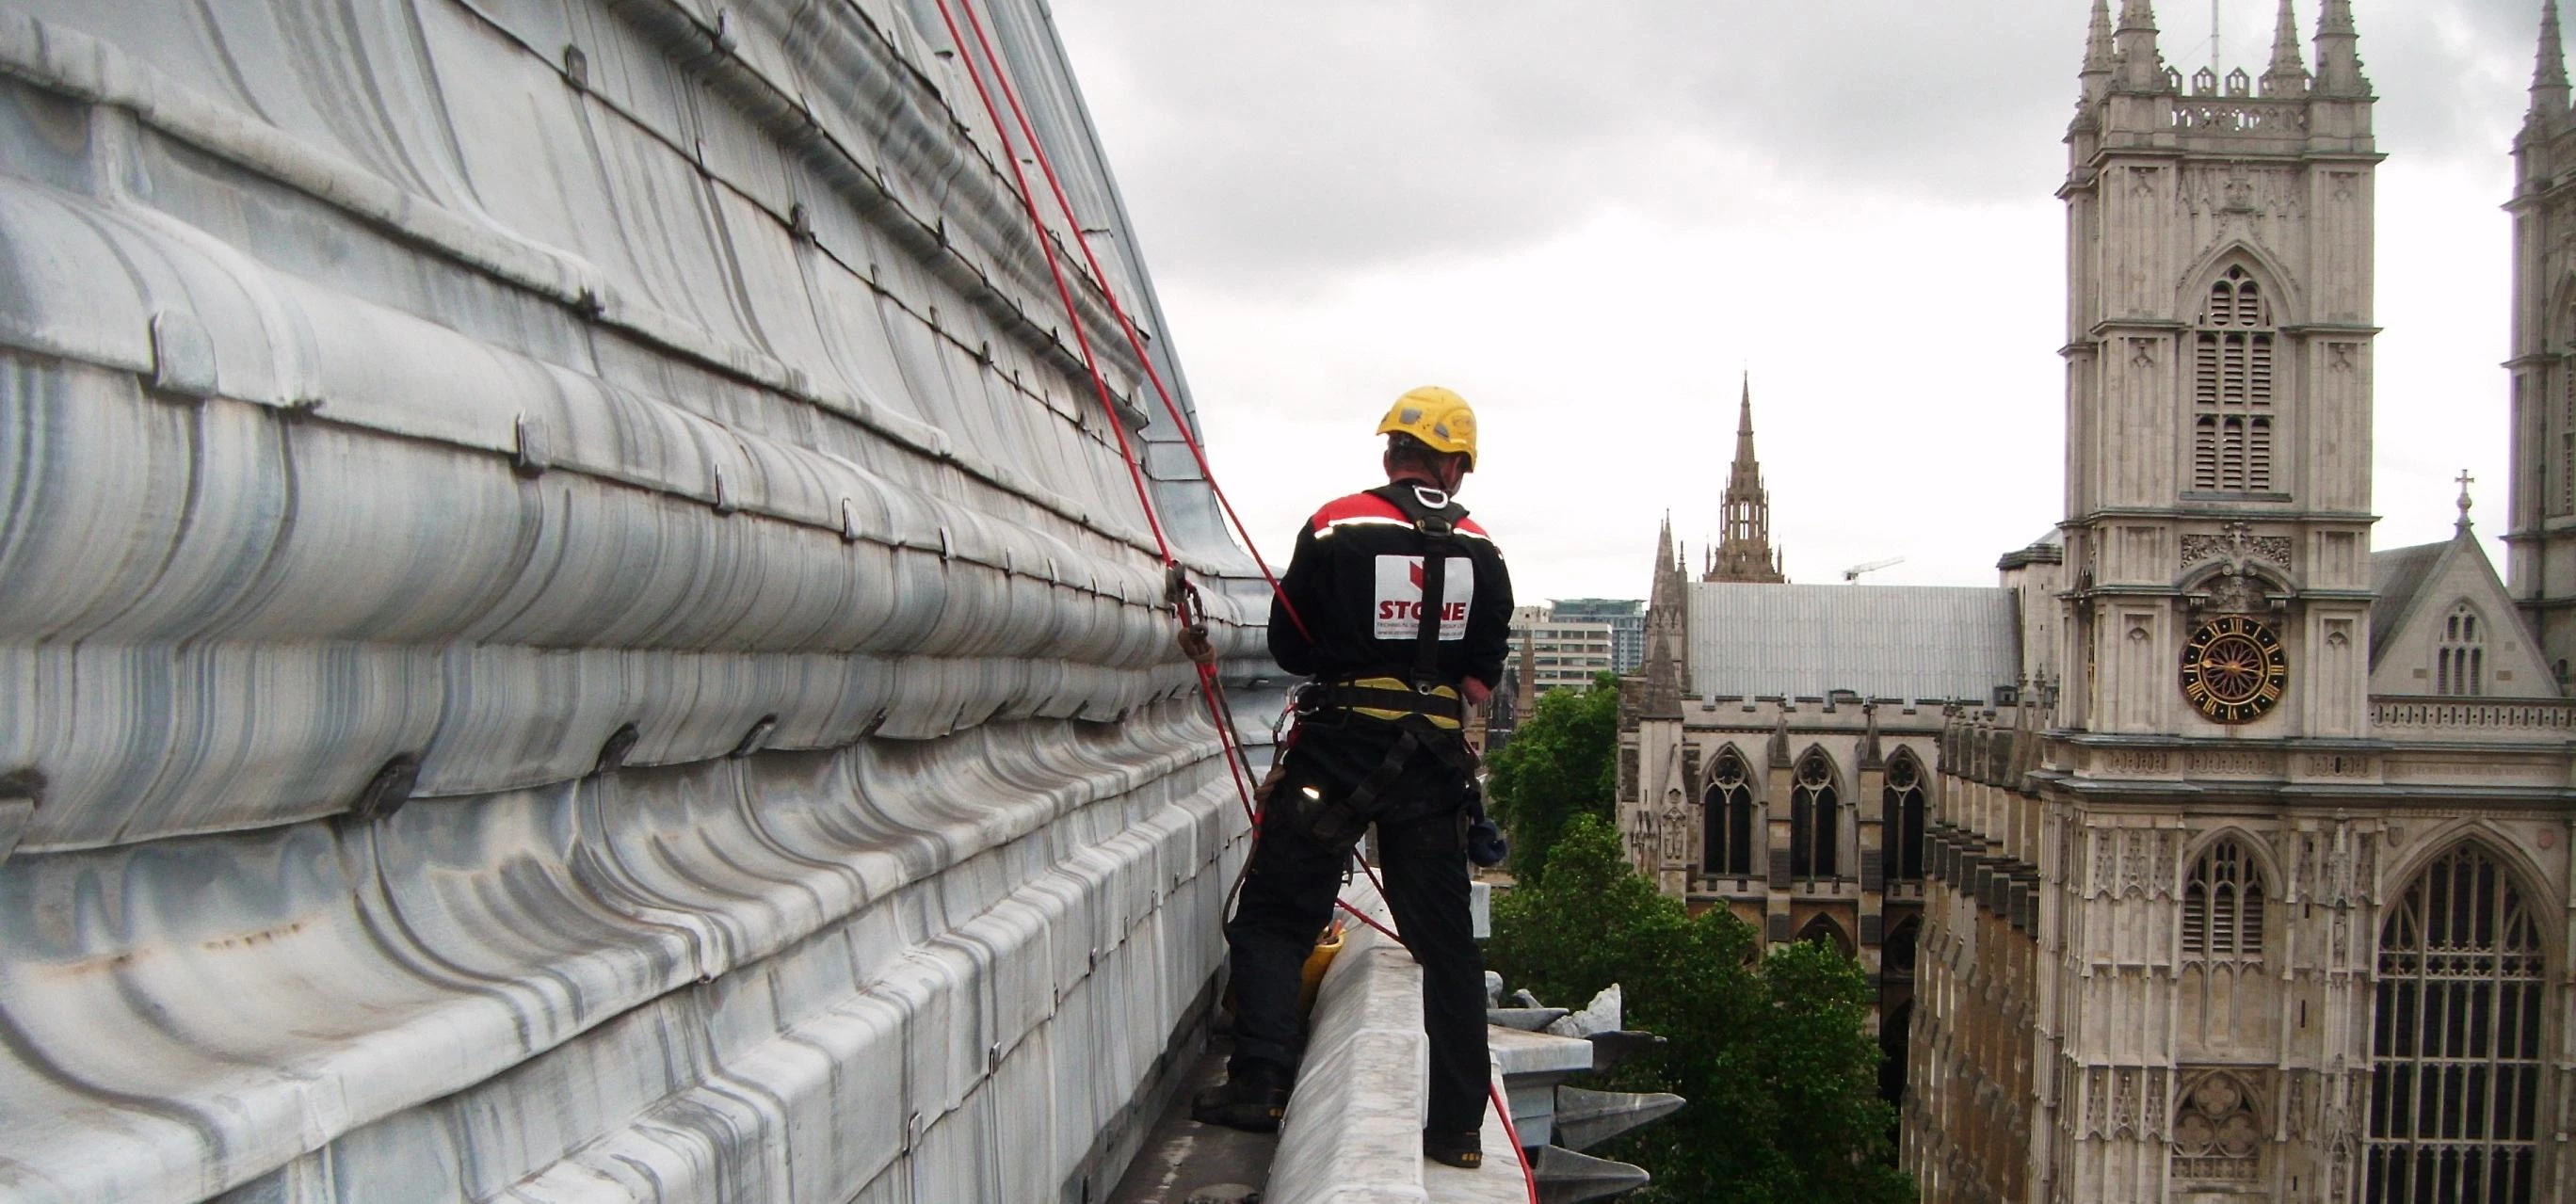 STS at work at Westminster Central Hall